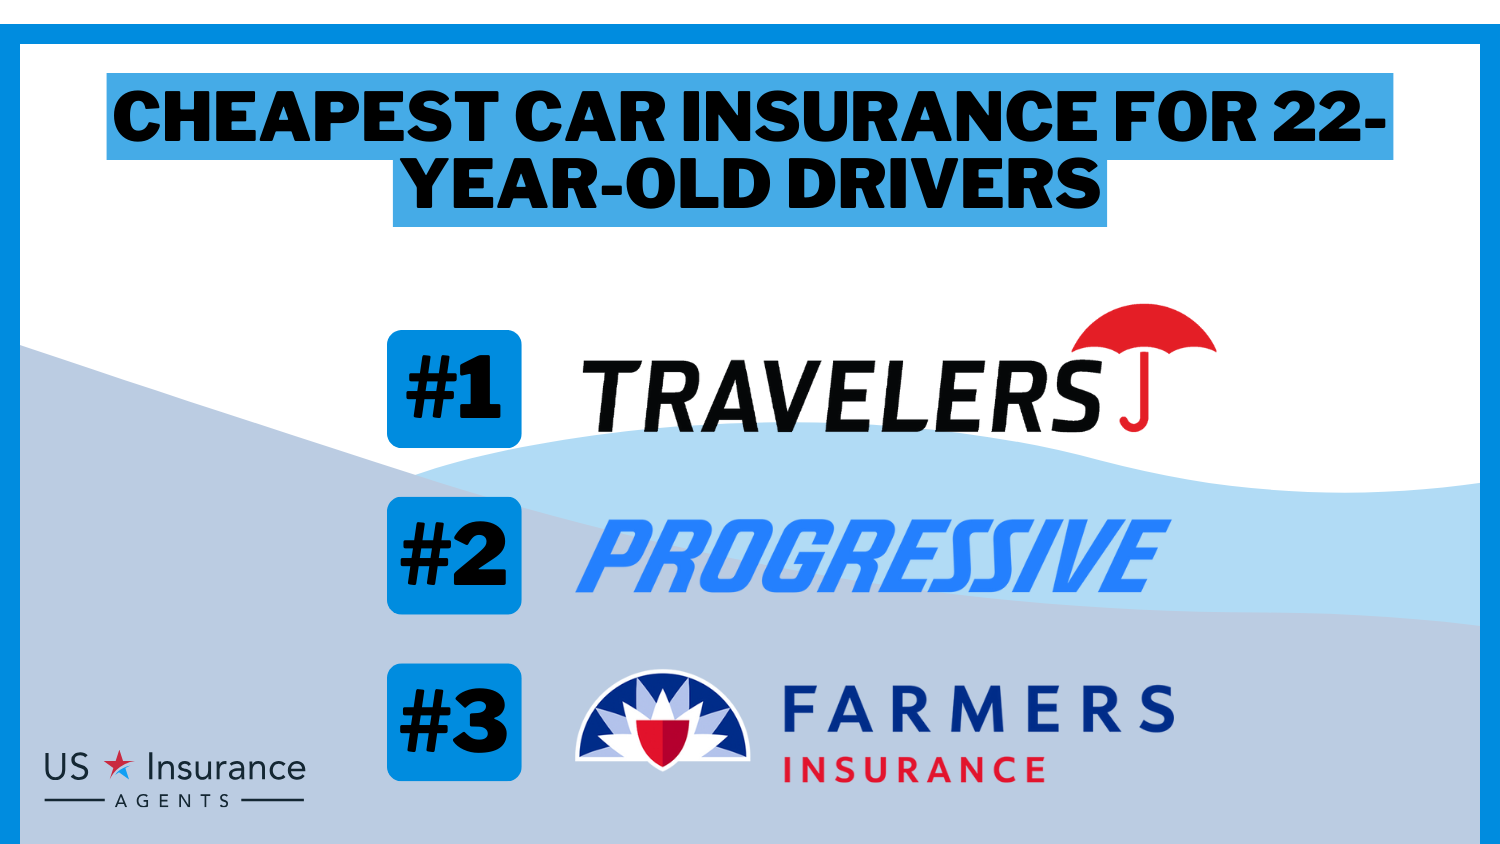 Cheapest Car Insurance for 22-Year-Old Drivers: Travelers, Progressive, and Farmers